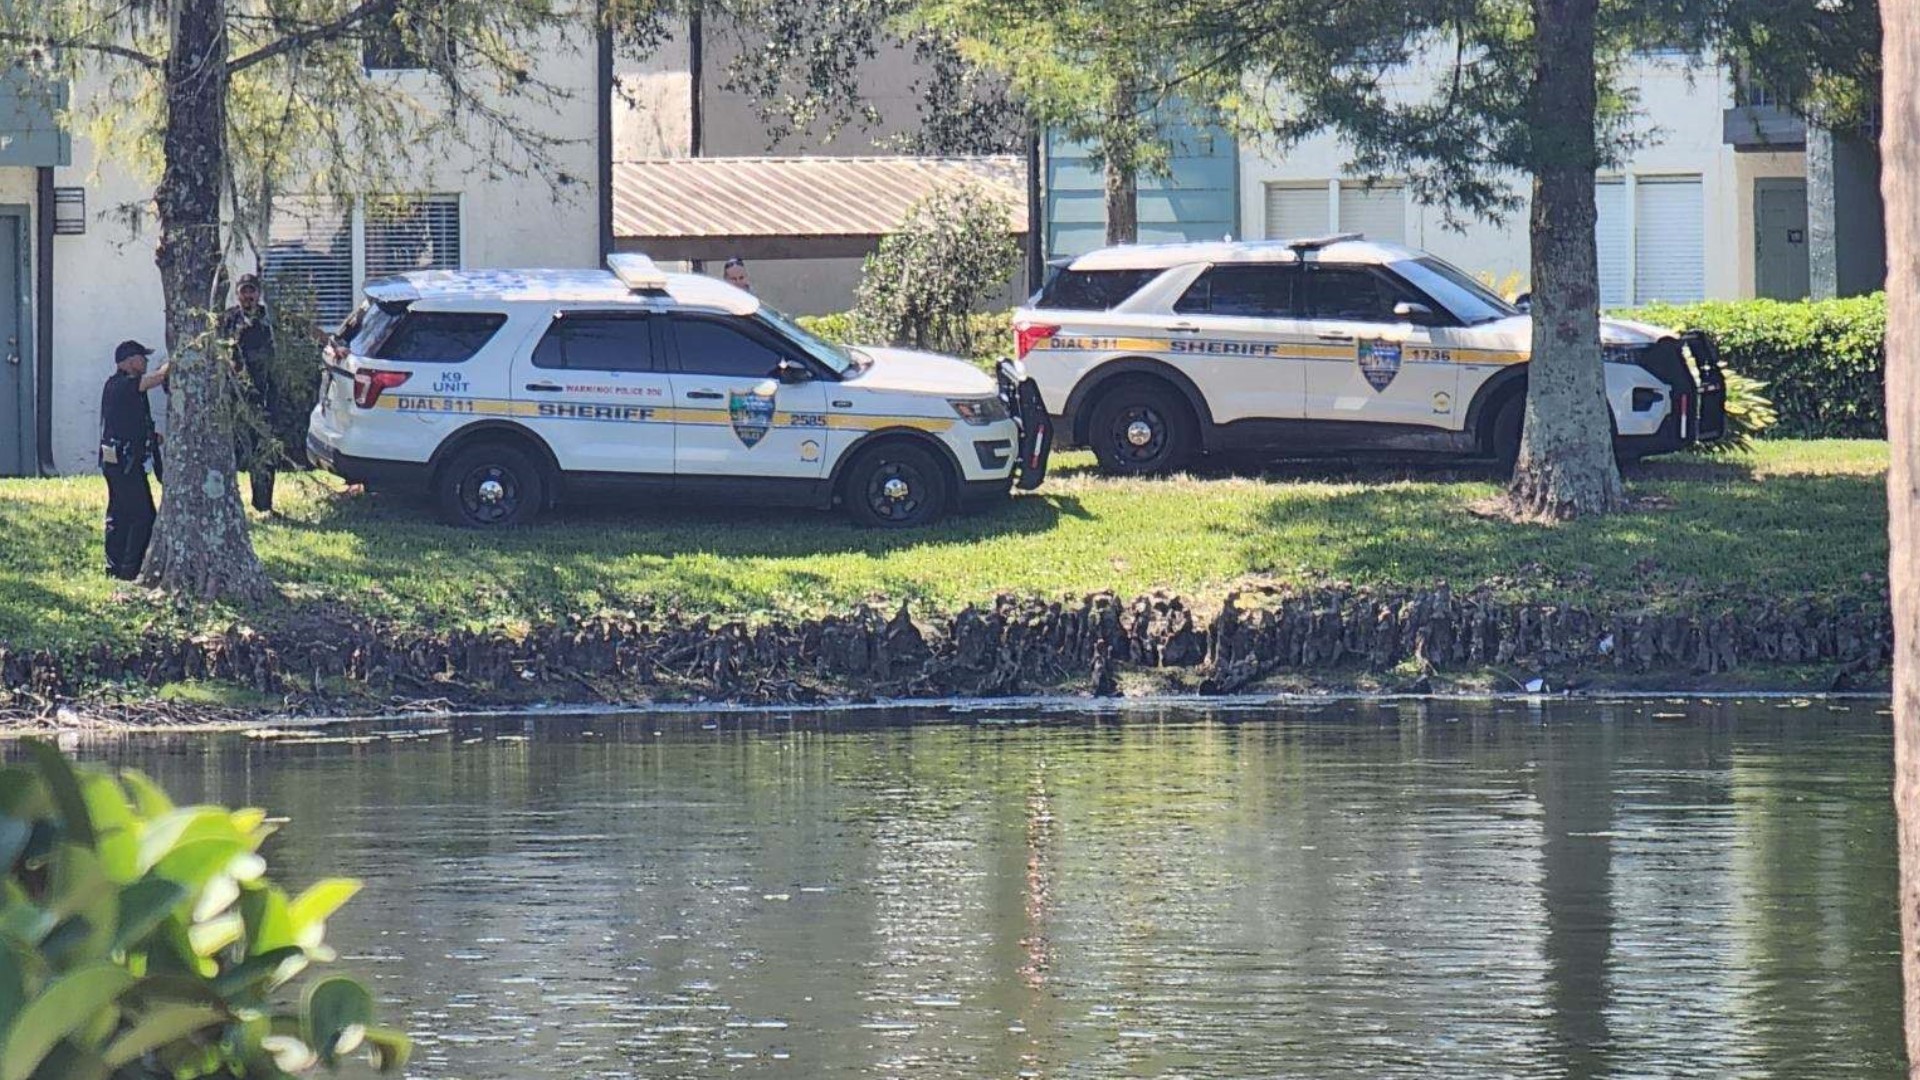 A JSO dispatcher told First Coast News that the current police presence is "targeted," meaning JSO knows that a victim was involved in some type of incident.